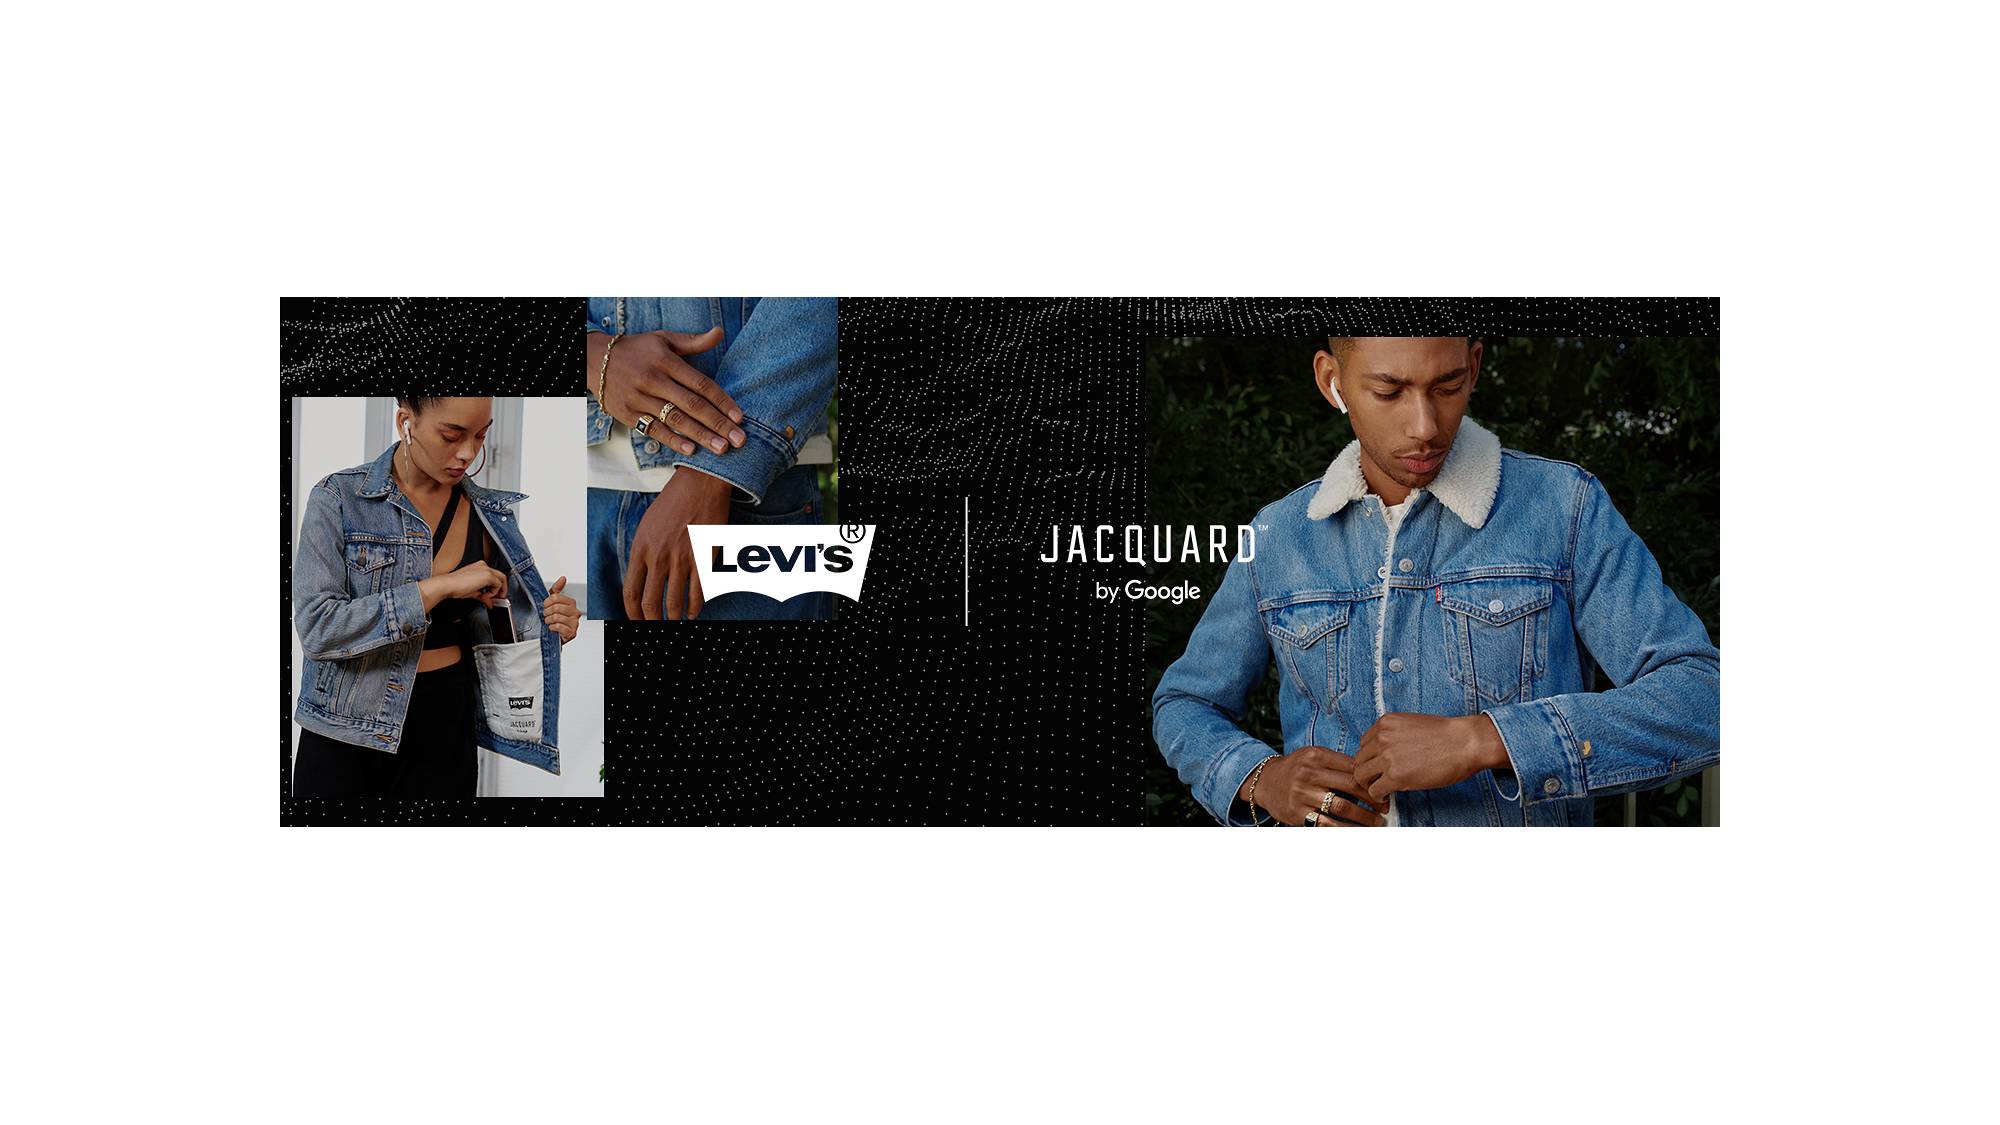 LEVI'S® TRUCKER JACKET WITH JACQUARD™ BY GOOGLE